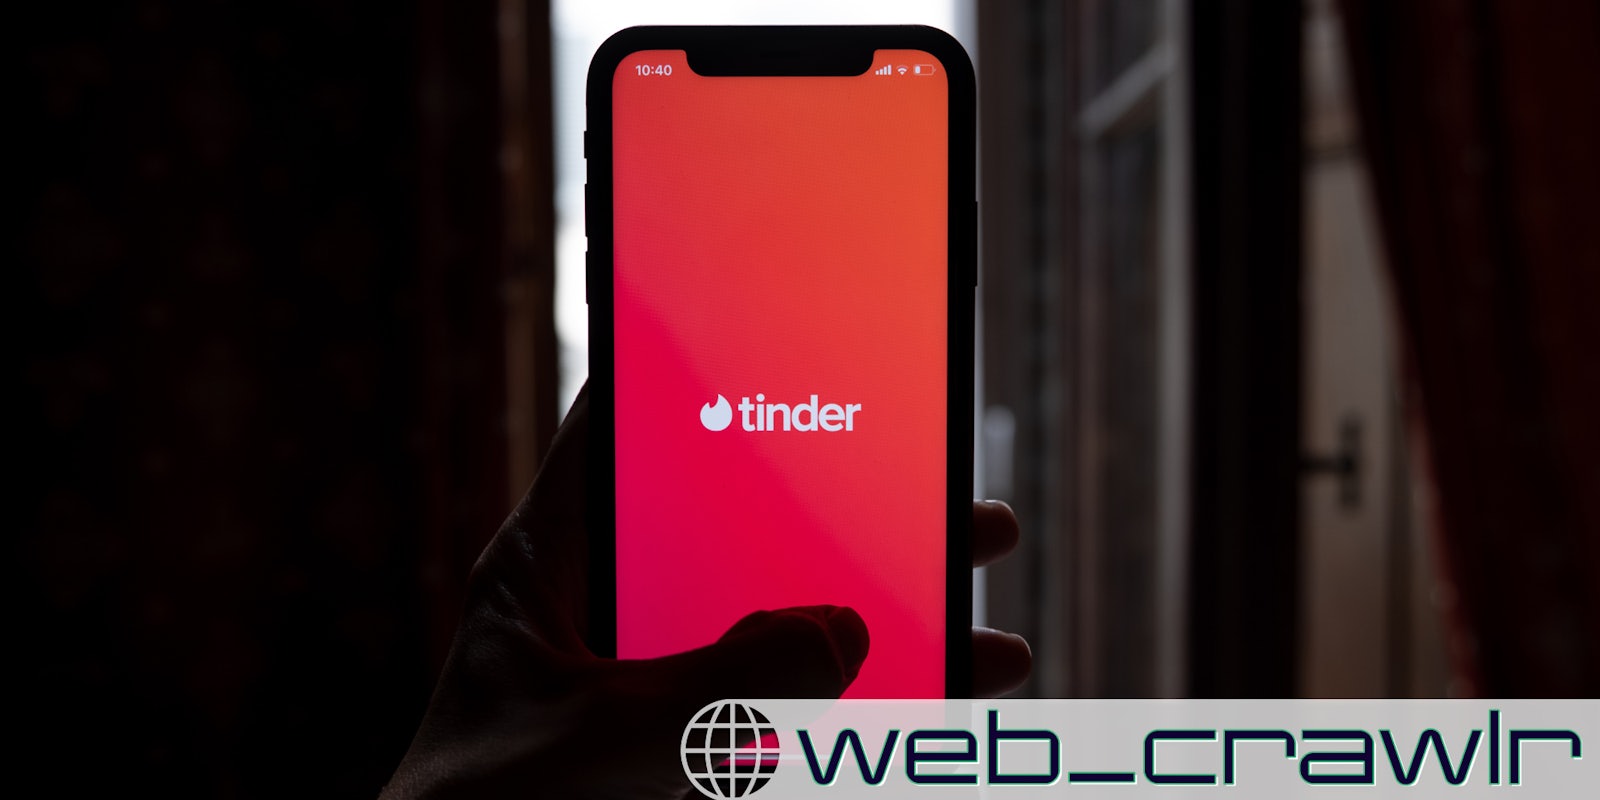 A person holding a smartphone with the Tinder logo on it. The Daily Dot newsletter web_crawlr logo is in the bottom right corner.